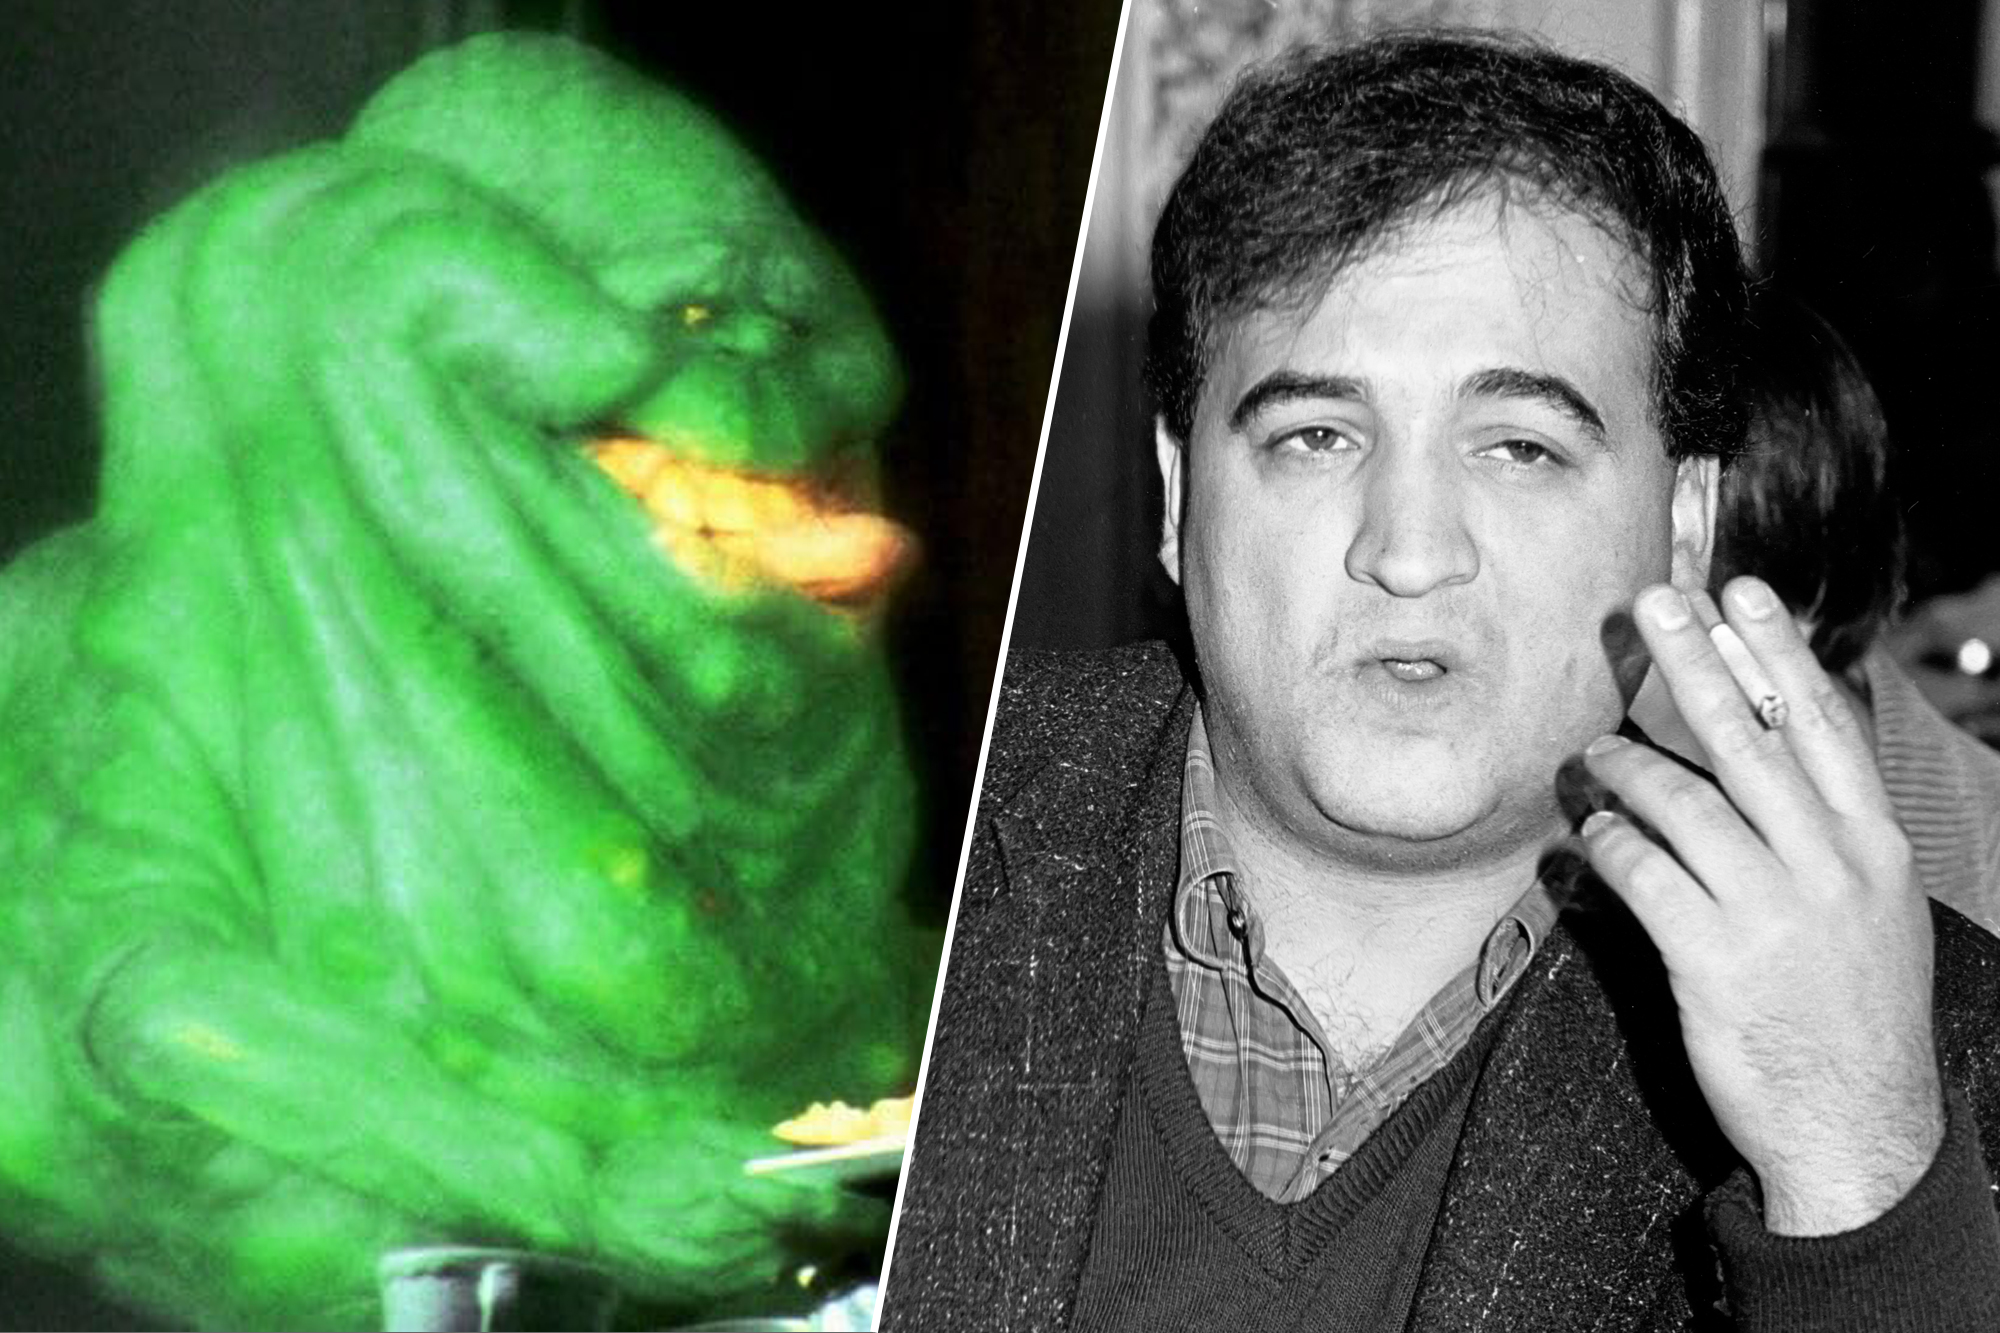 <a>Slimer, John Belushi</a> Columbia Pictures; CW Braun/Images/Getty Images